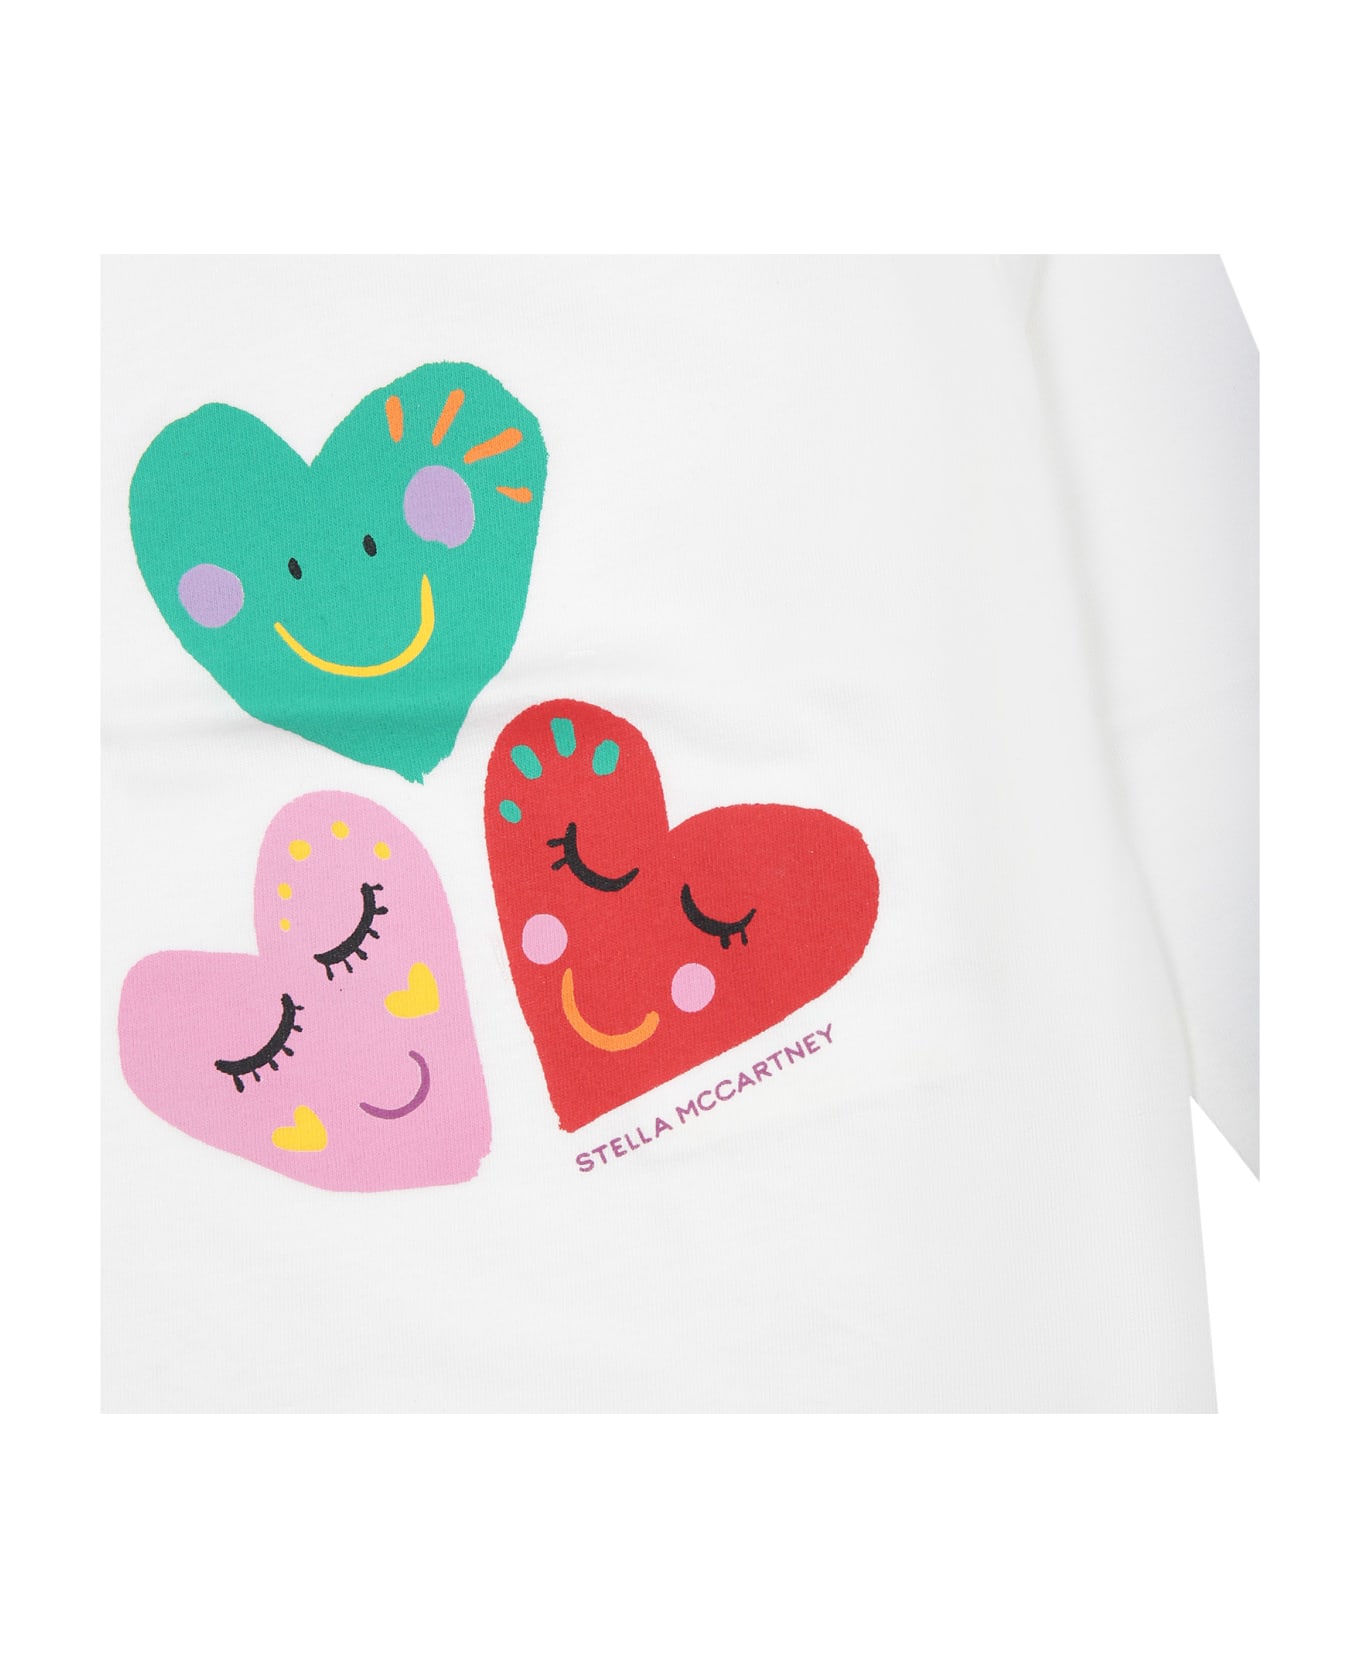 Stella McCartney Kids Ivory T-shirt For Baby Girl With Heart Print - Ivory Tシャツ＆ポロシャツ